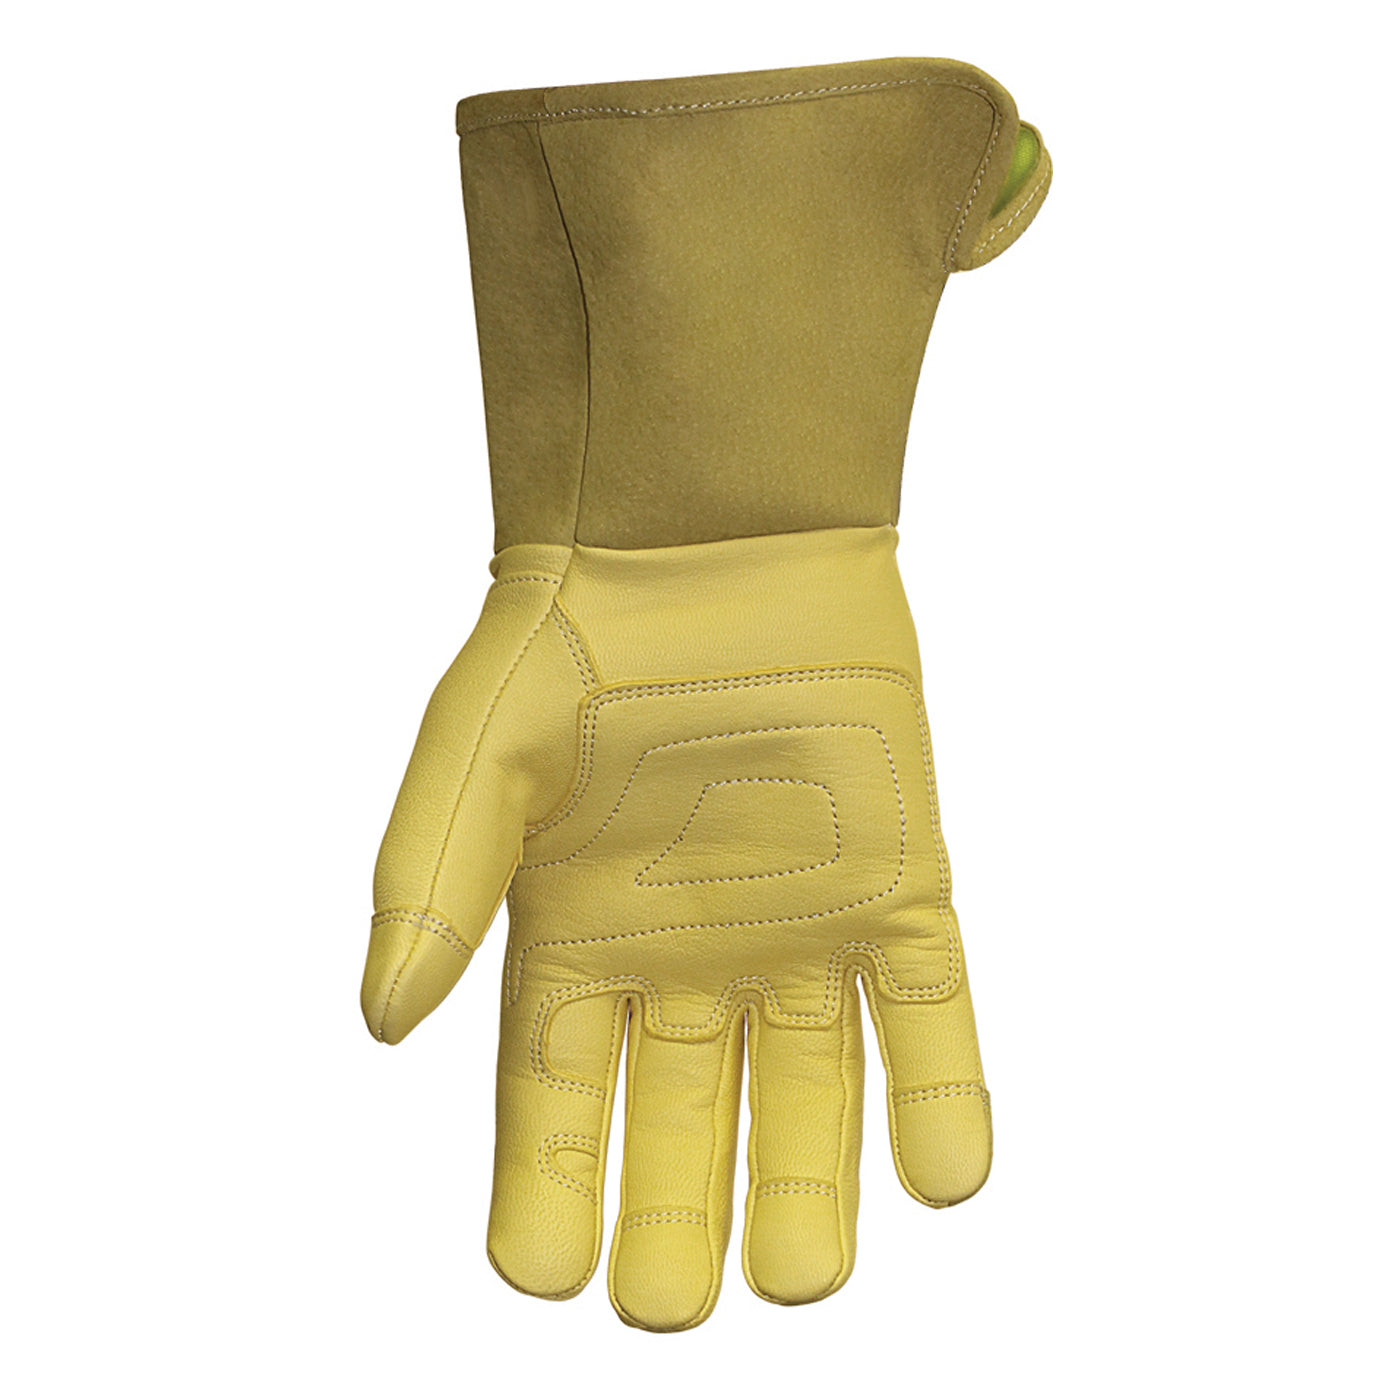 12-3275-60 Youngstown FR Leather Utility Wide Cuff Glove - Main image